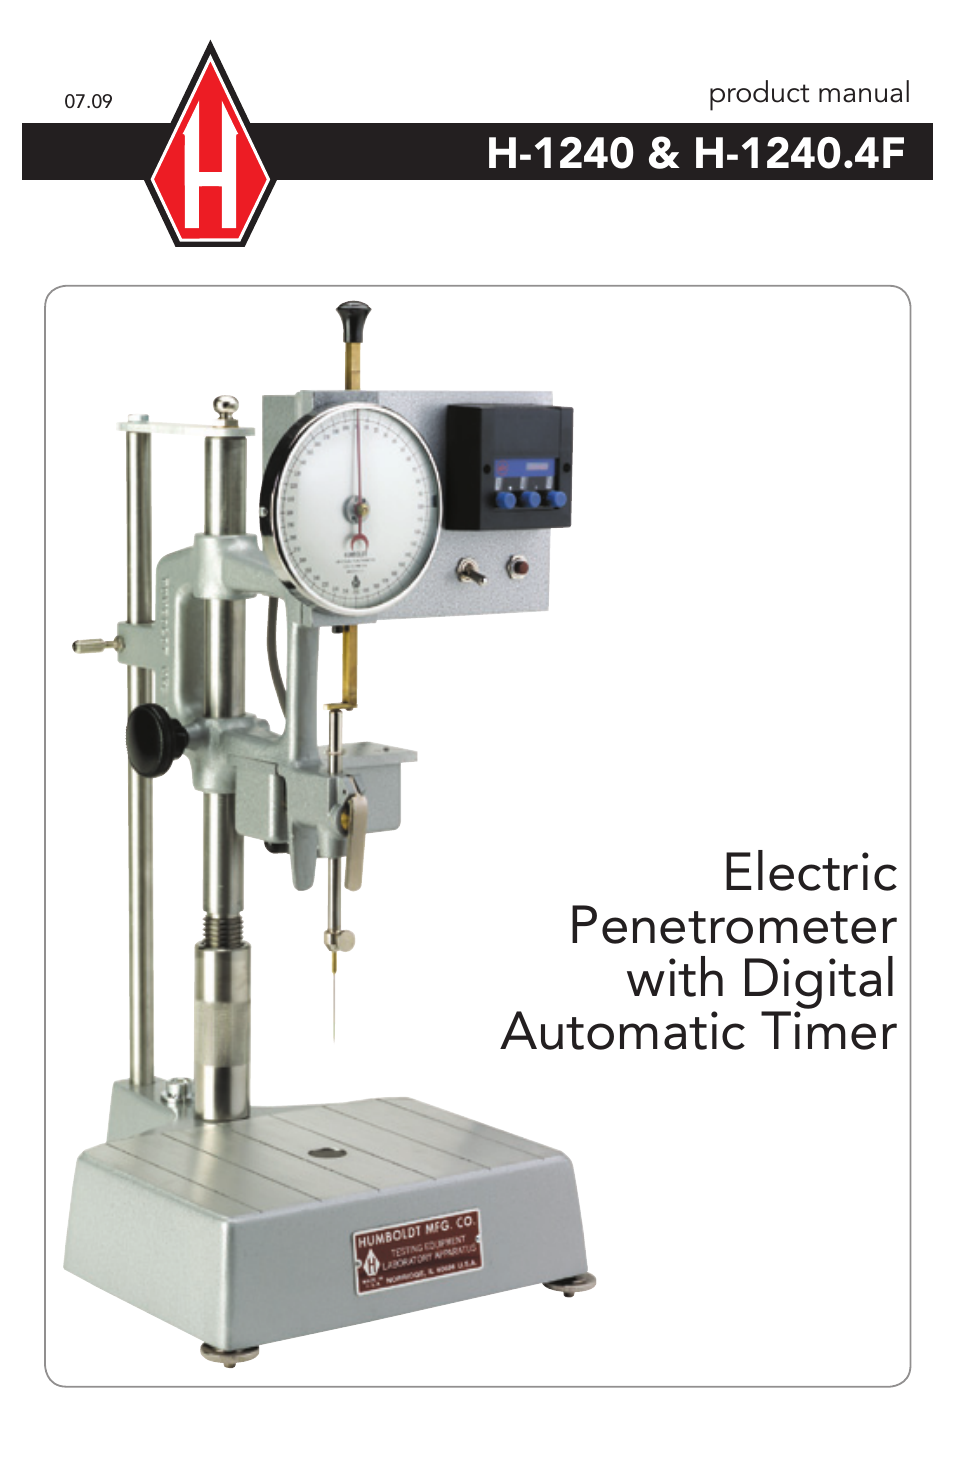 H-1240.4F Electric Penetrometer with Digital Automatic Timer